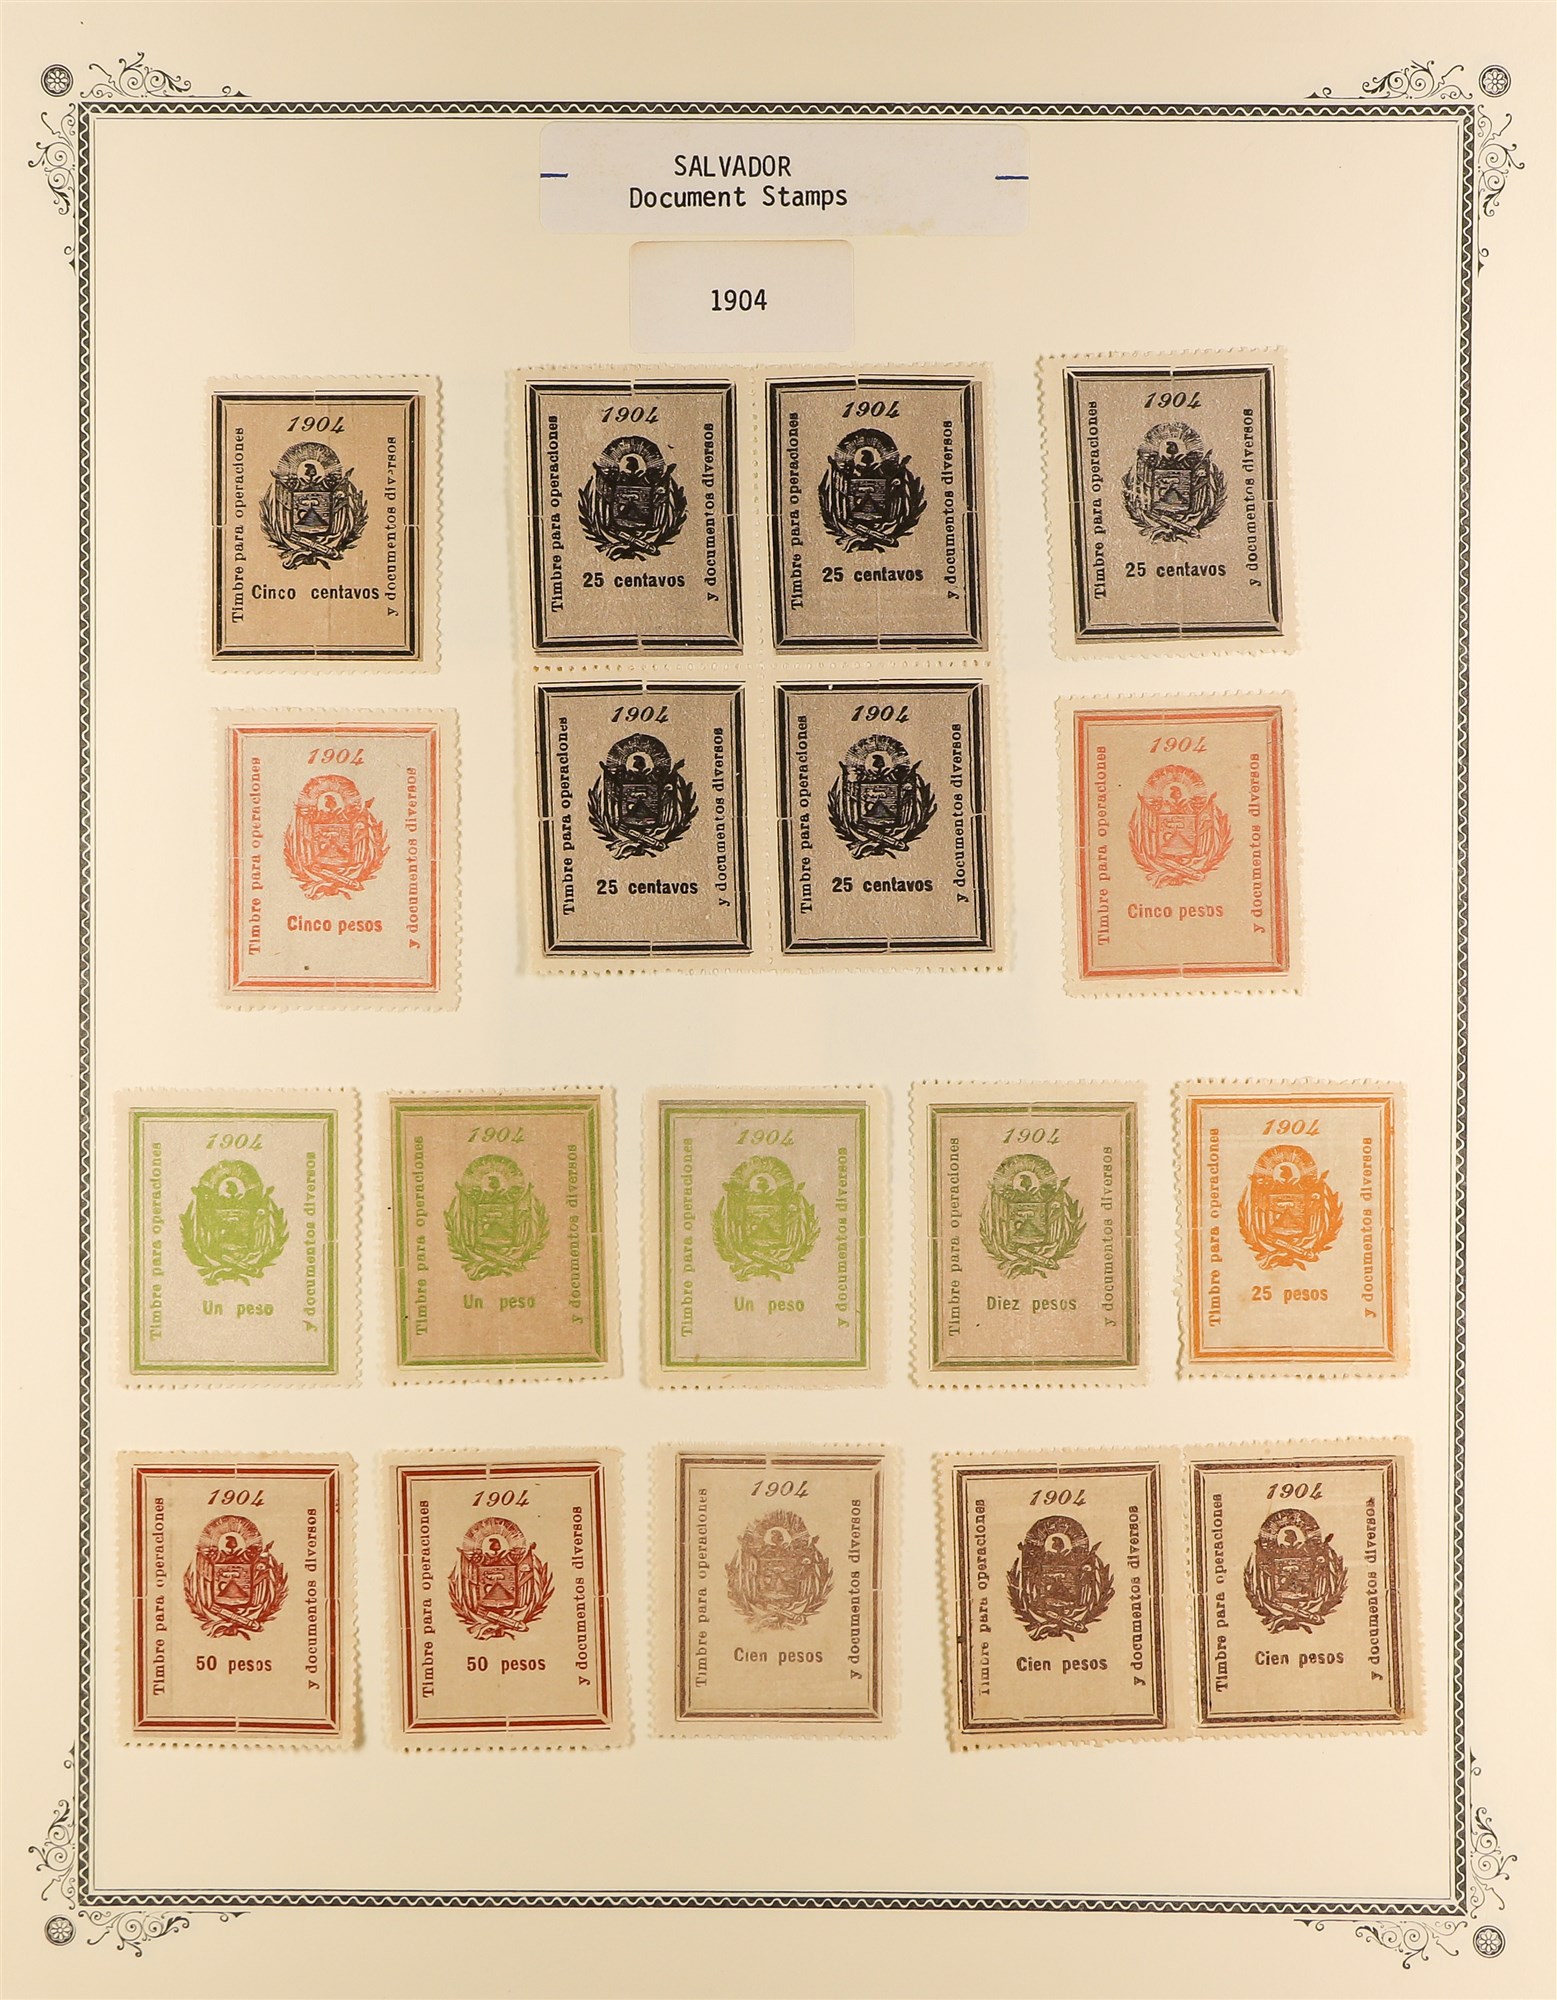 EL SALVADOR REVENUE STAMPS 1883 - 1925 mint & used collection of over 400 revenue stamps, on album - Image 5 of 27